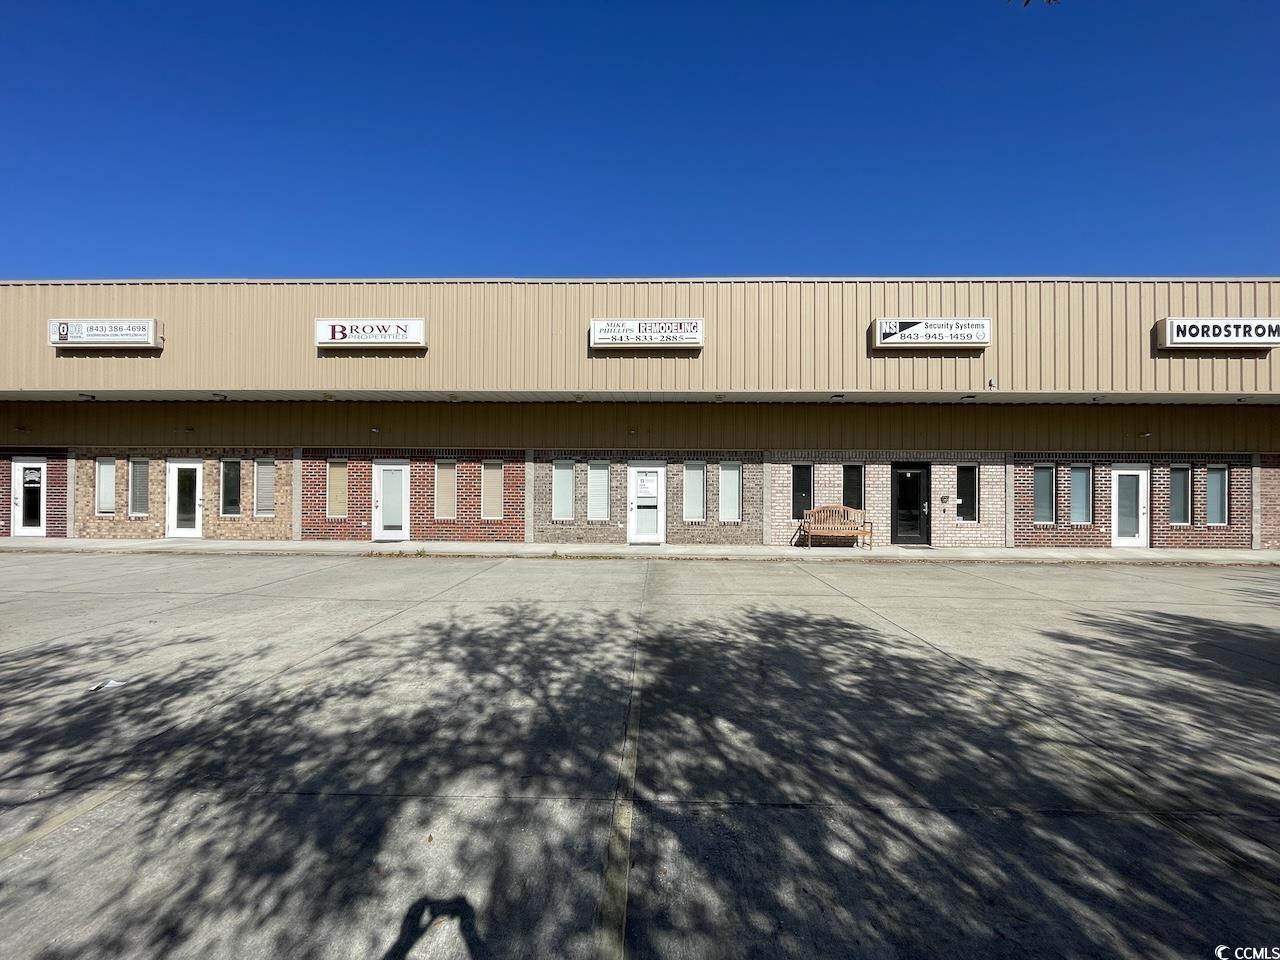 for lease:  fully conditioned 2,000 sf office/warehouse with reception area in front, 2 private offices, work area with sink and restroom.  office area in front is approx. 20'w x 20'l (400 sf).  1,600 sf warehouse area in rear with 12x12 overhead door and additional loft storage above office area accessible via stairwell from warehouse.  small outdoor storage area in rear.  property is located outside of surfside beach city limits, under horry county jurisdiction.  re-4 zoning.